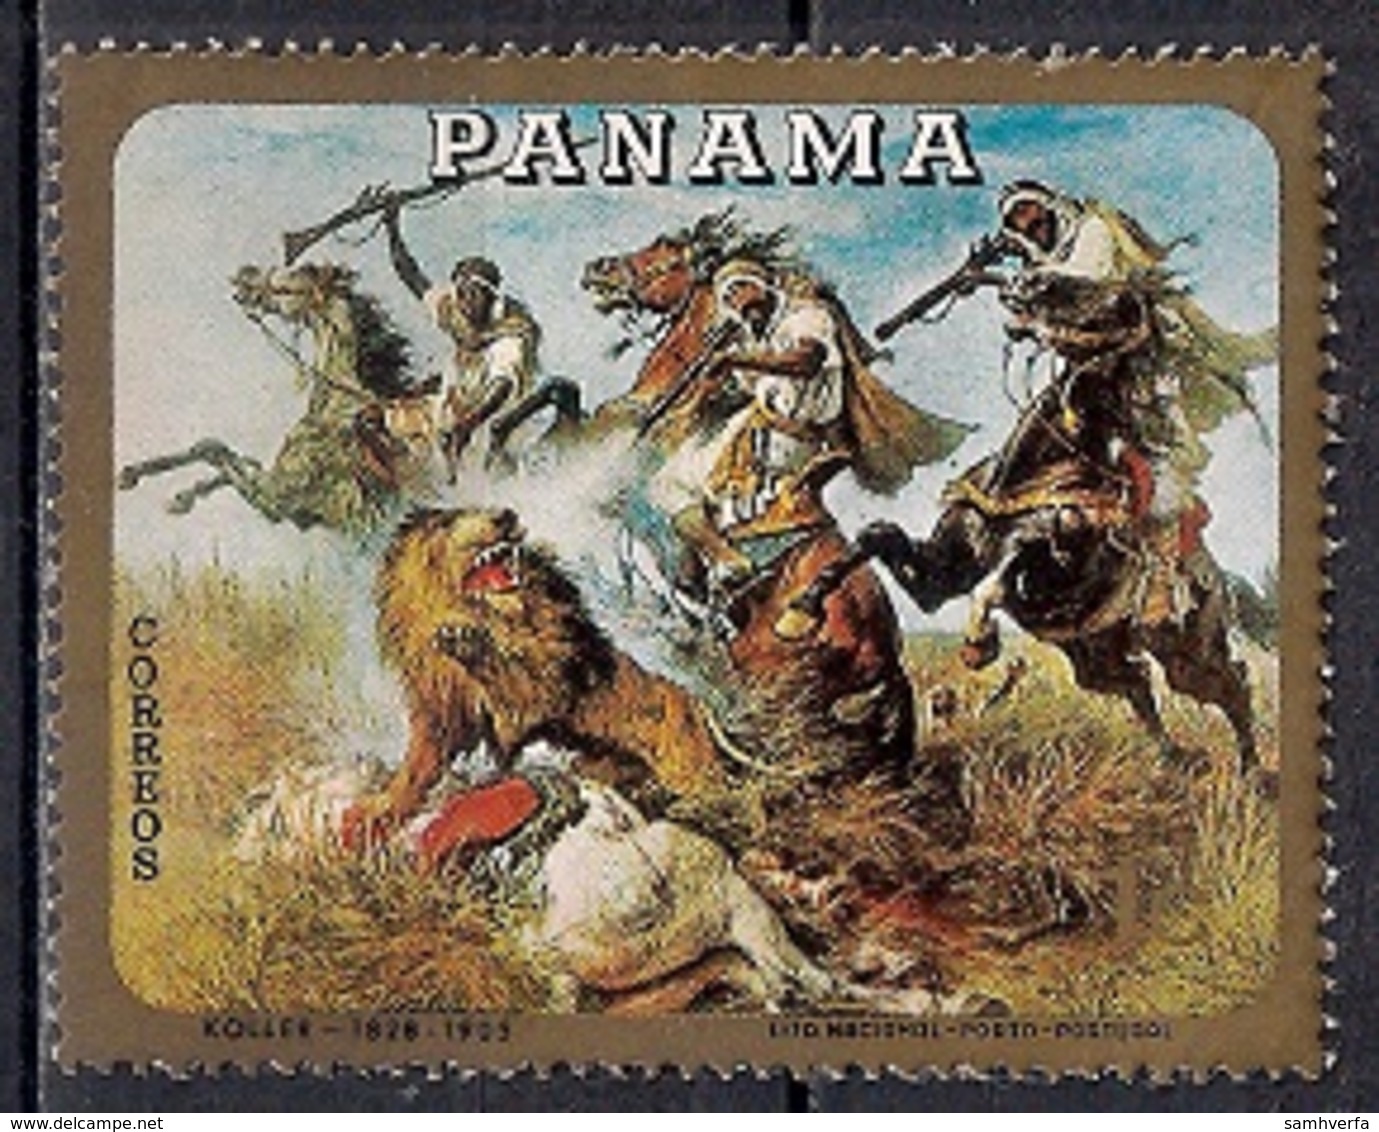 Panama 1968 - Chase Scenes On Horseback On Paintings And Tapestries From The 17th-19th Century - Panamá